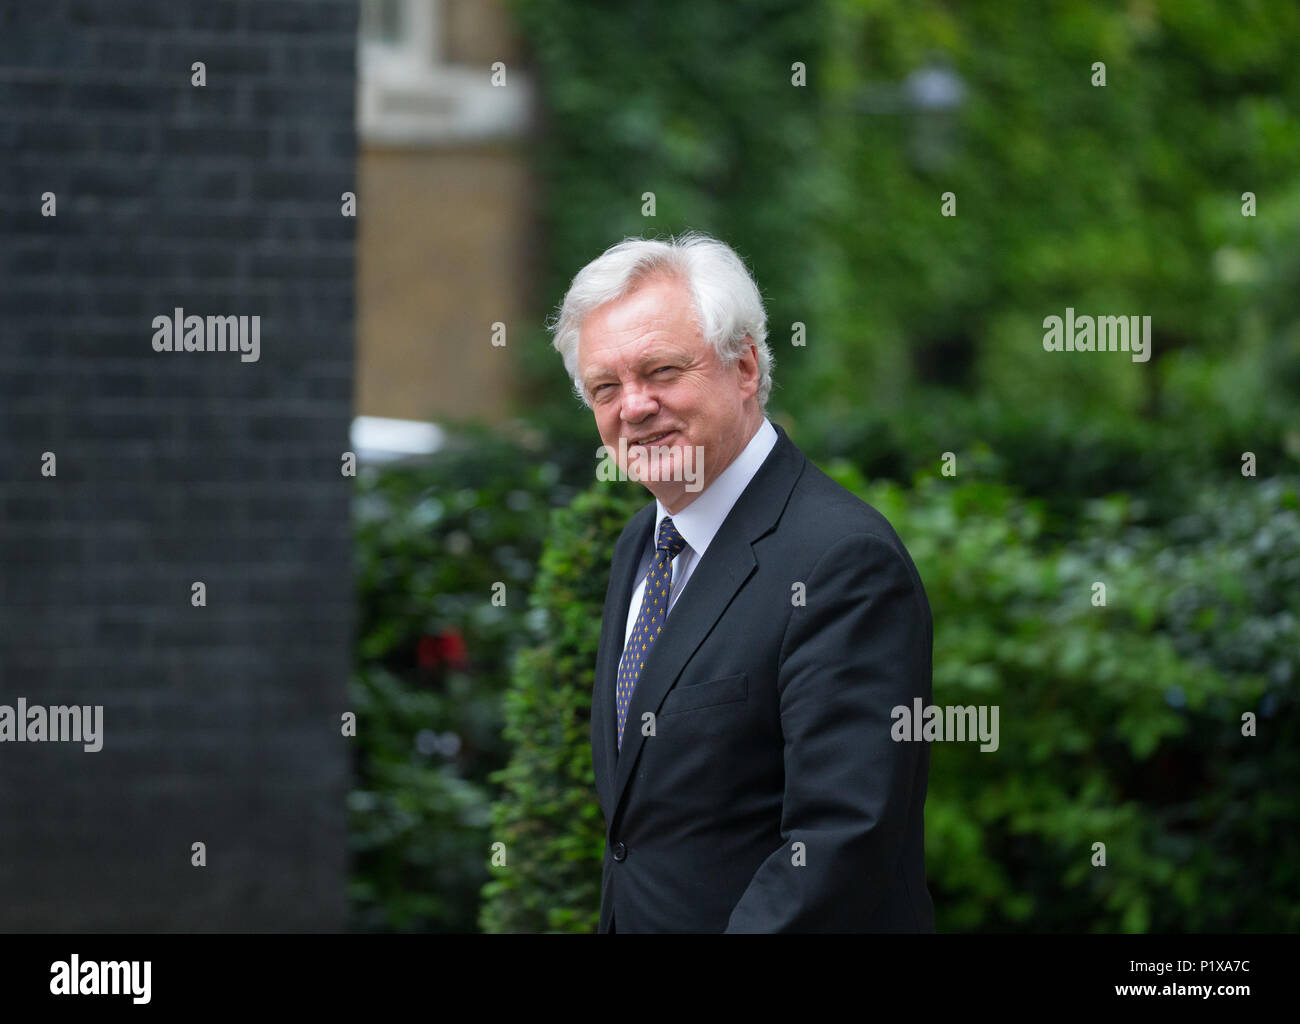 David Davis, Fomer Secretary for Exiting the European Union, at Downing street for a Cabinet meeting Stock Photo